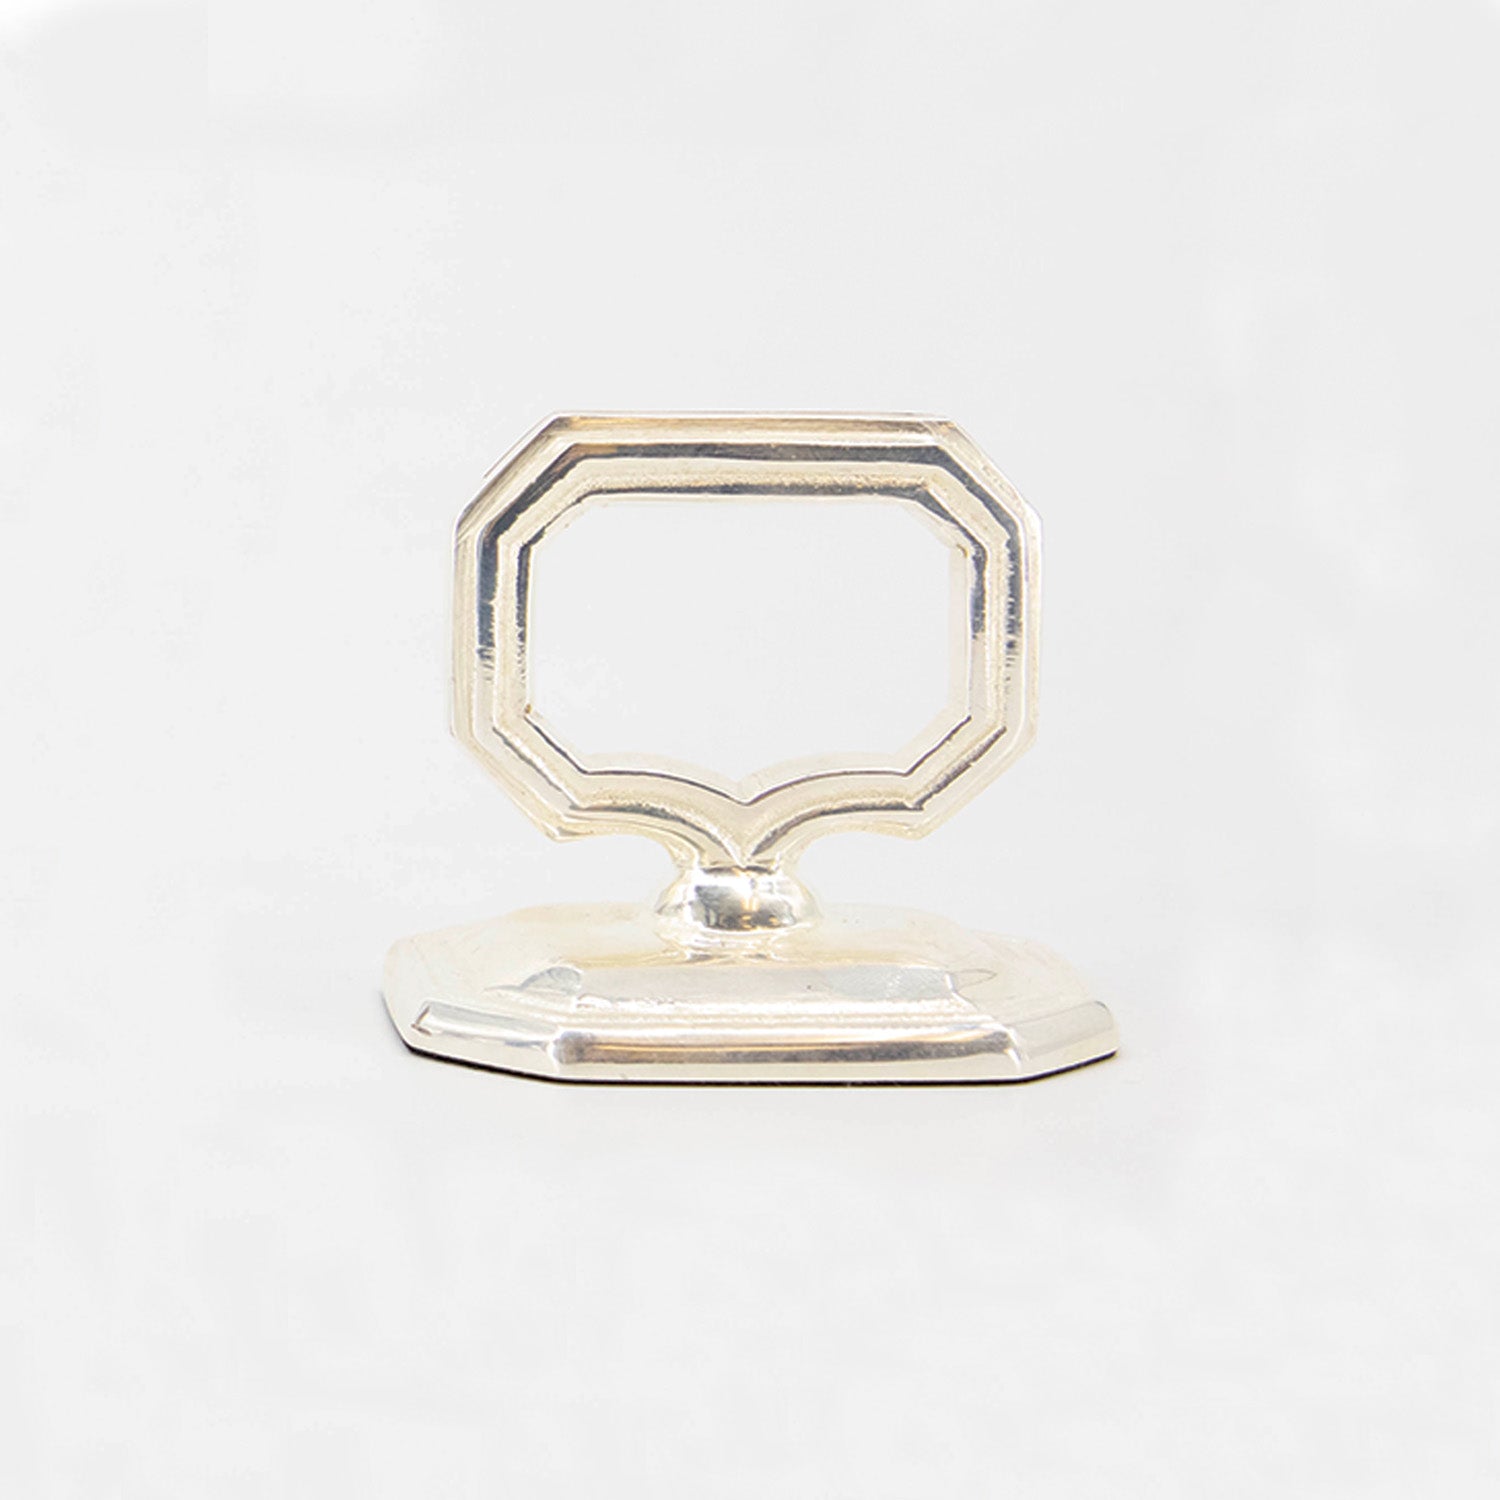 A silver vintage-style Napkin Ring with Place Card Holder on a white background.